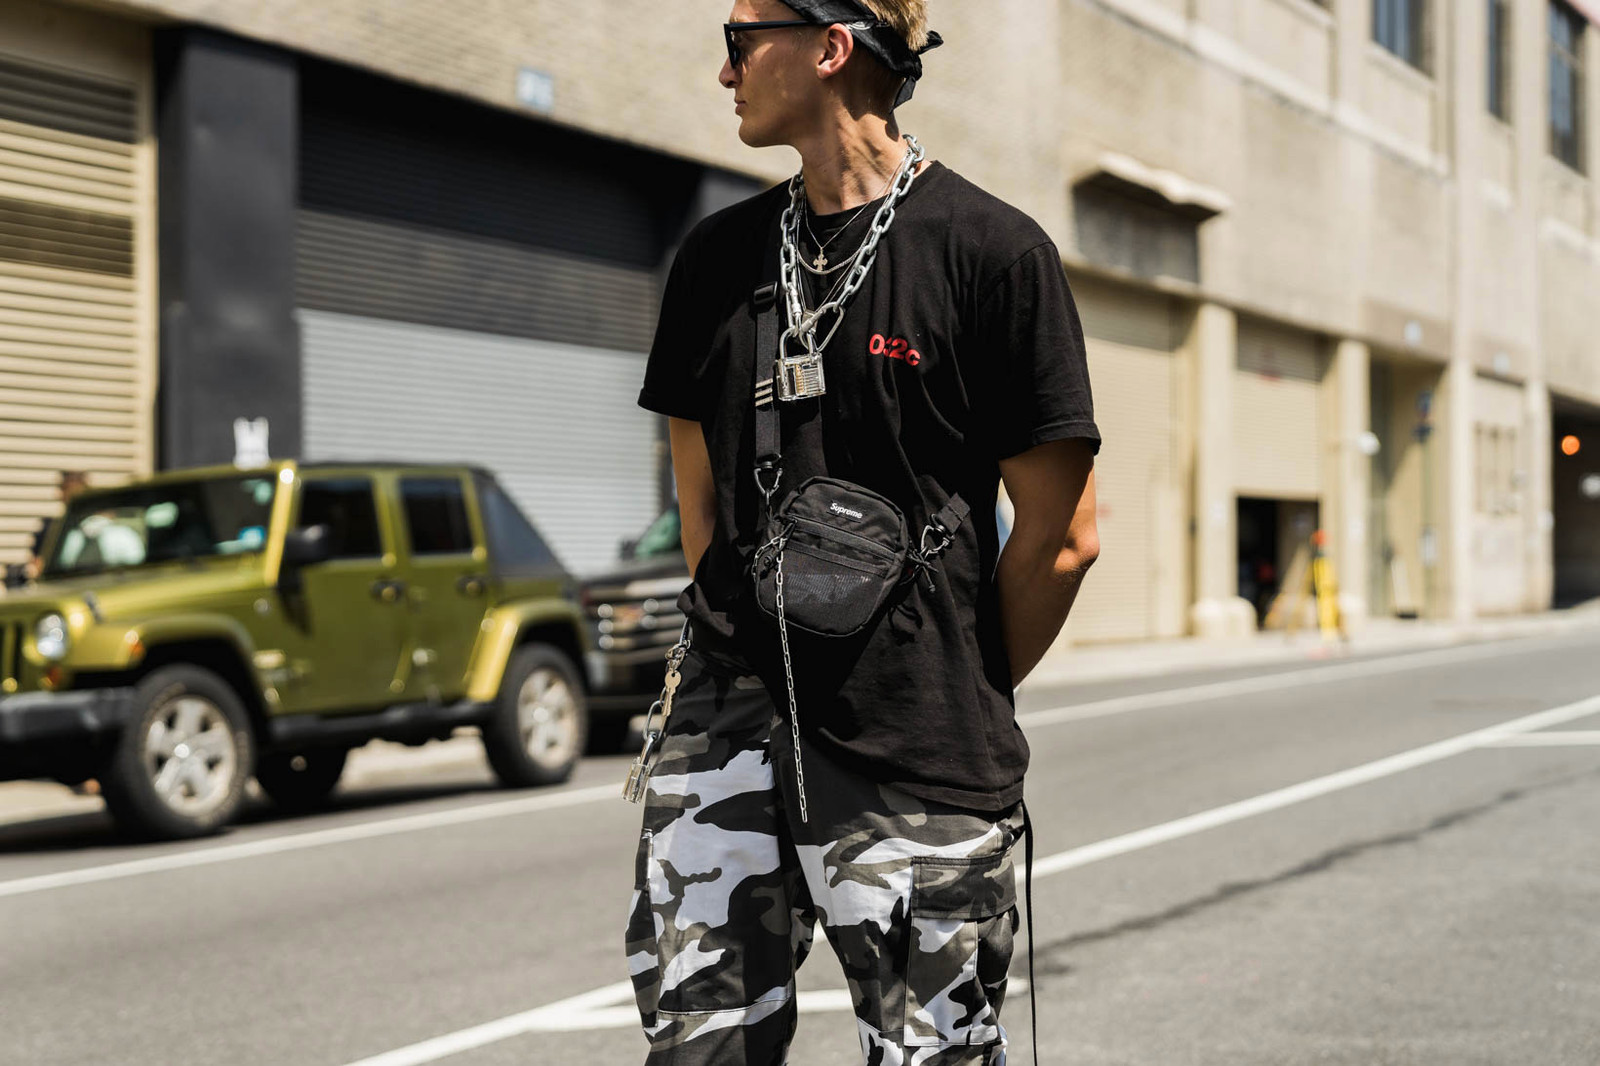 Hypebeast Outfit Philippines: Key Items And How To Style Them